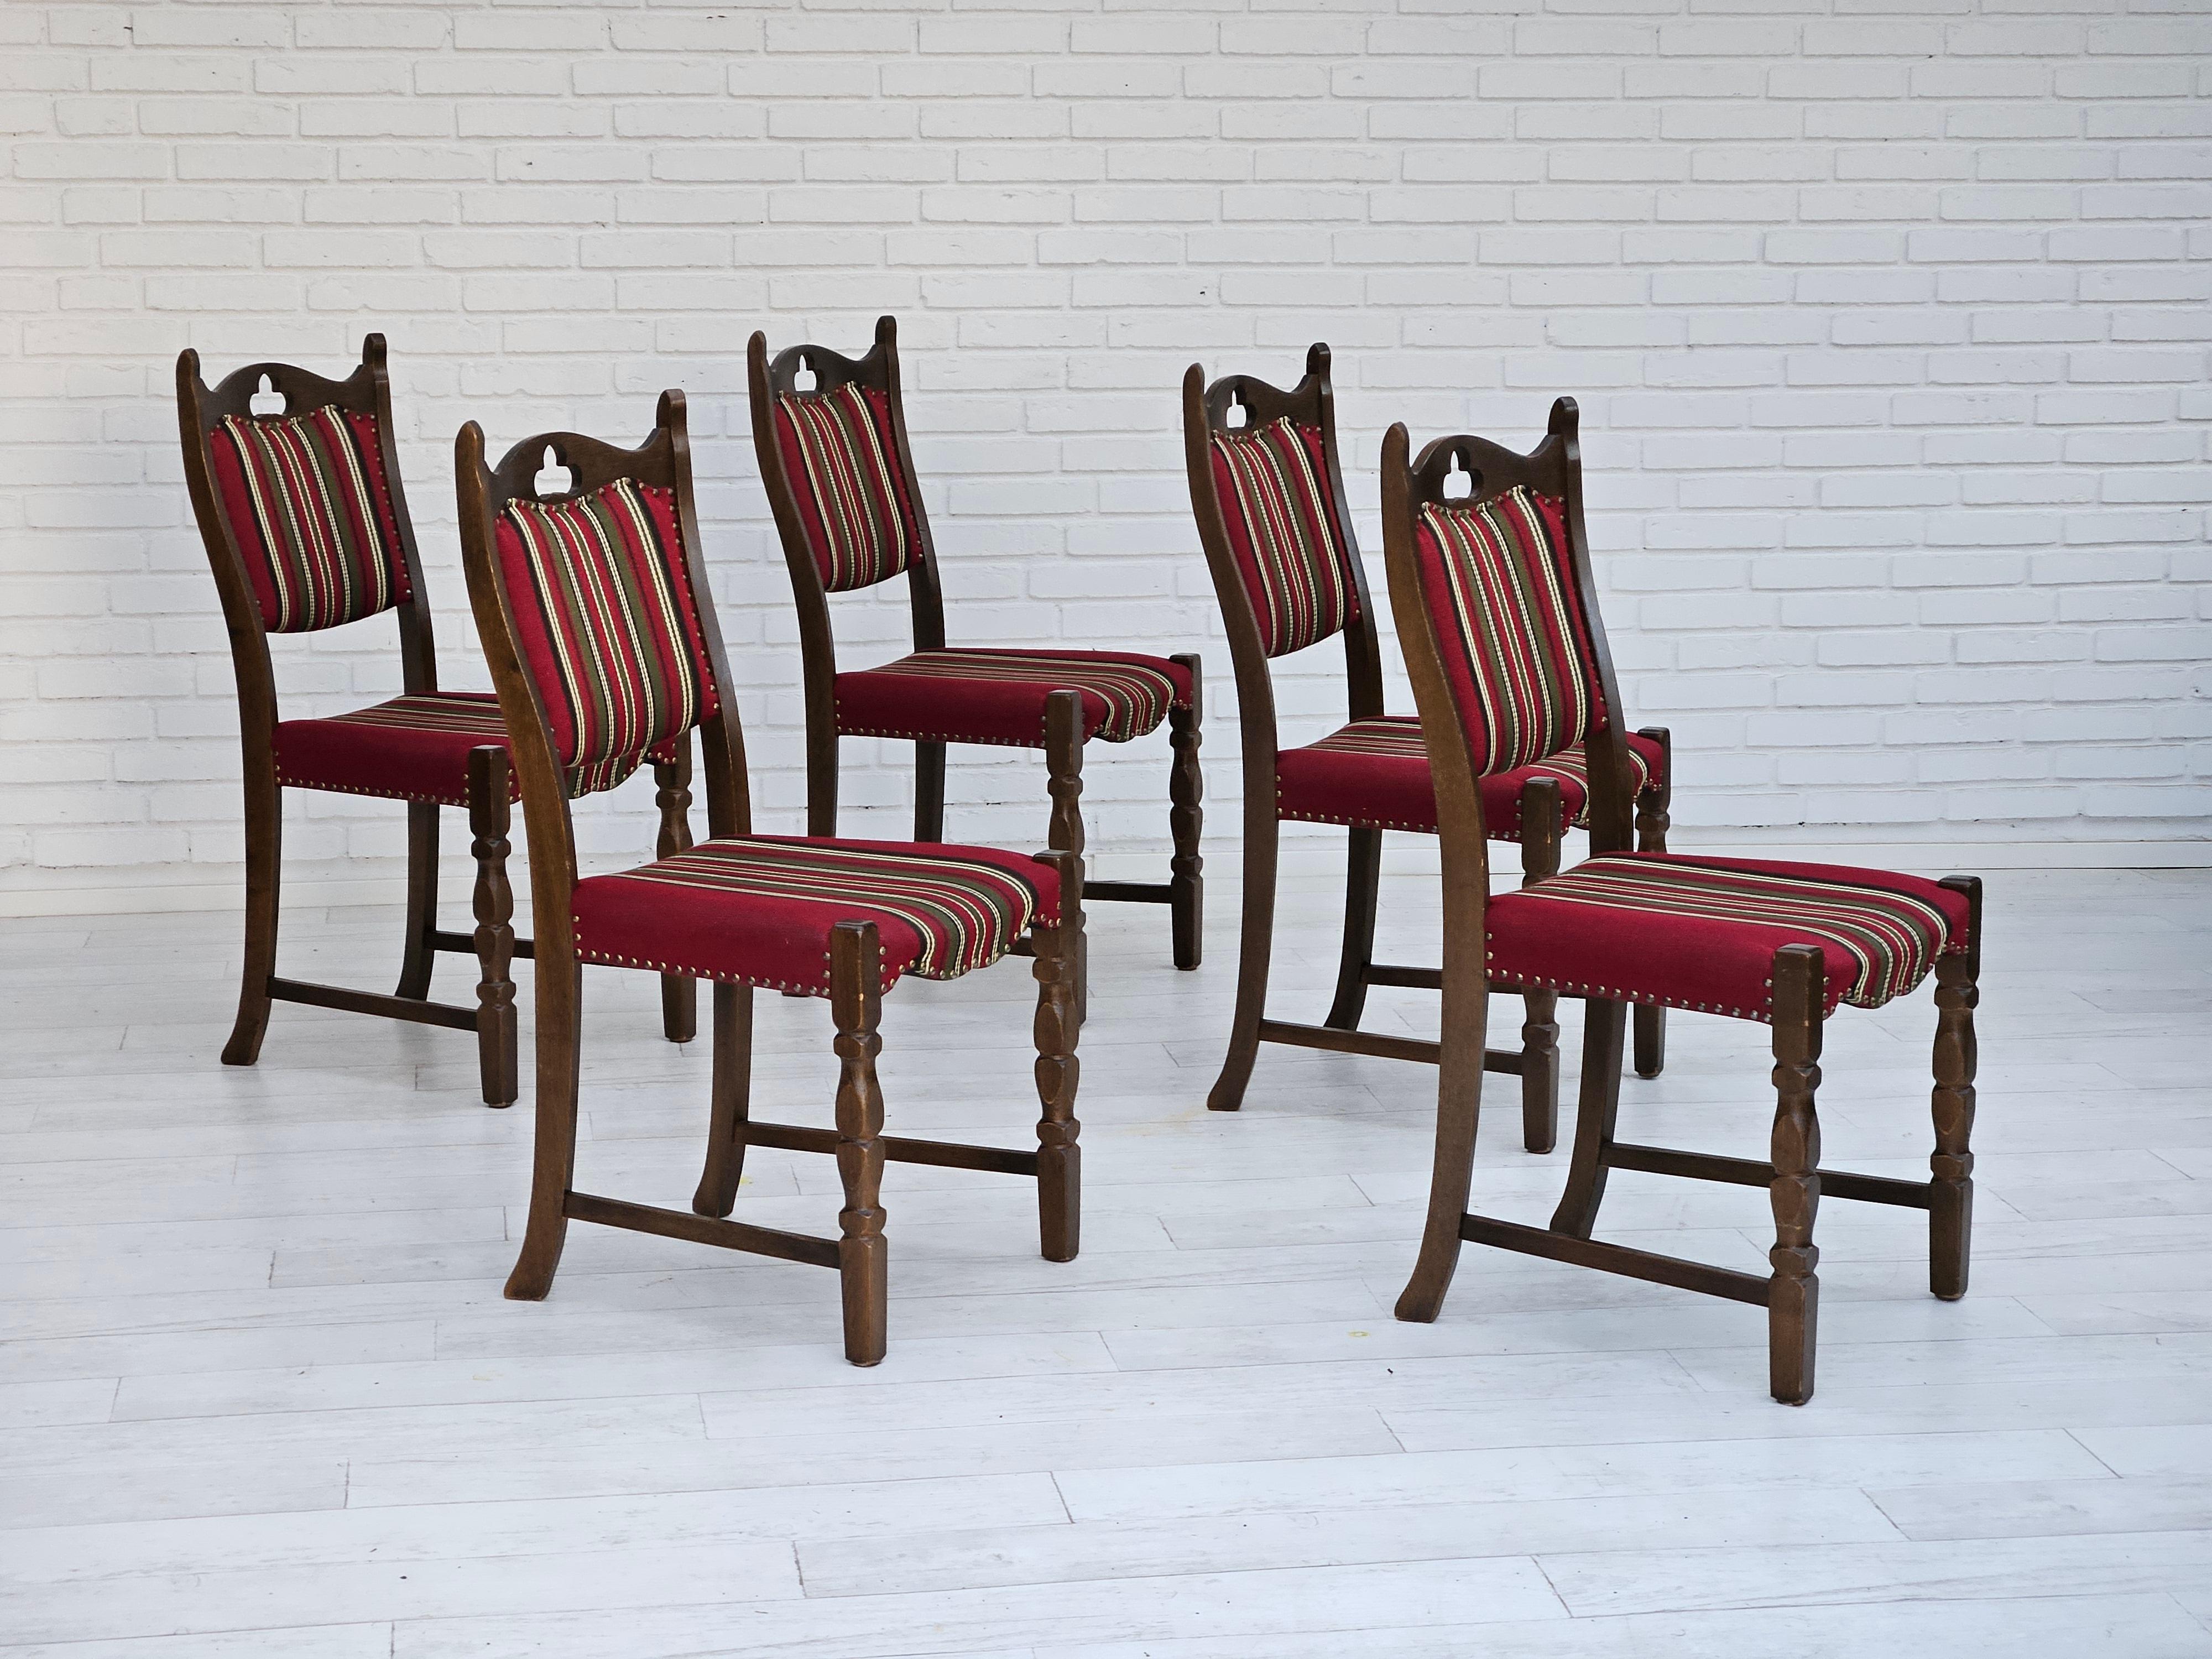 1960s, set of 5 pcs Danish dining chairs. Original very good condition: no smells and no stains. Furniture wool fabric, dark oak wood. Manufactured by Danish furniture manufacturer in about 1960s.